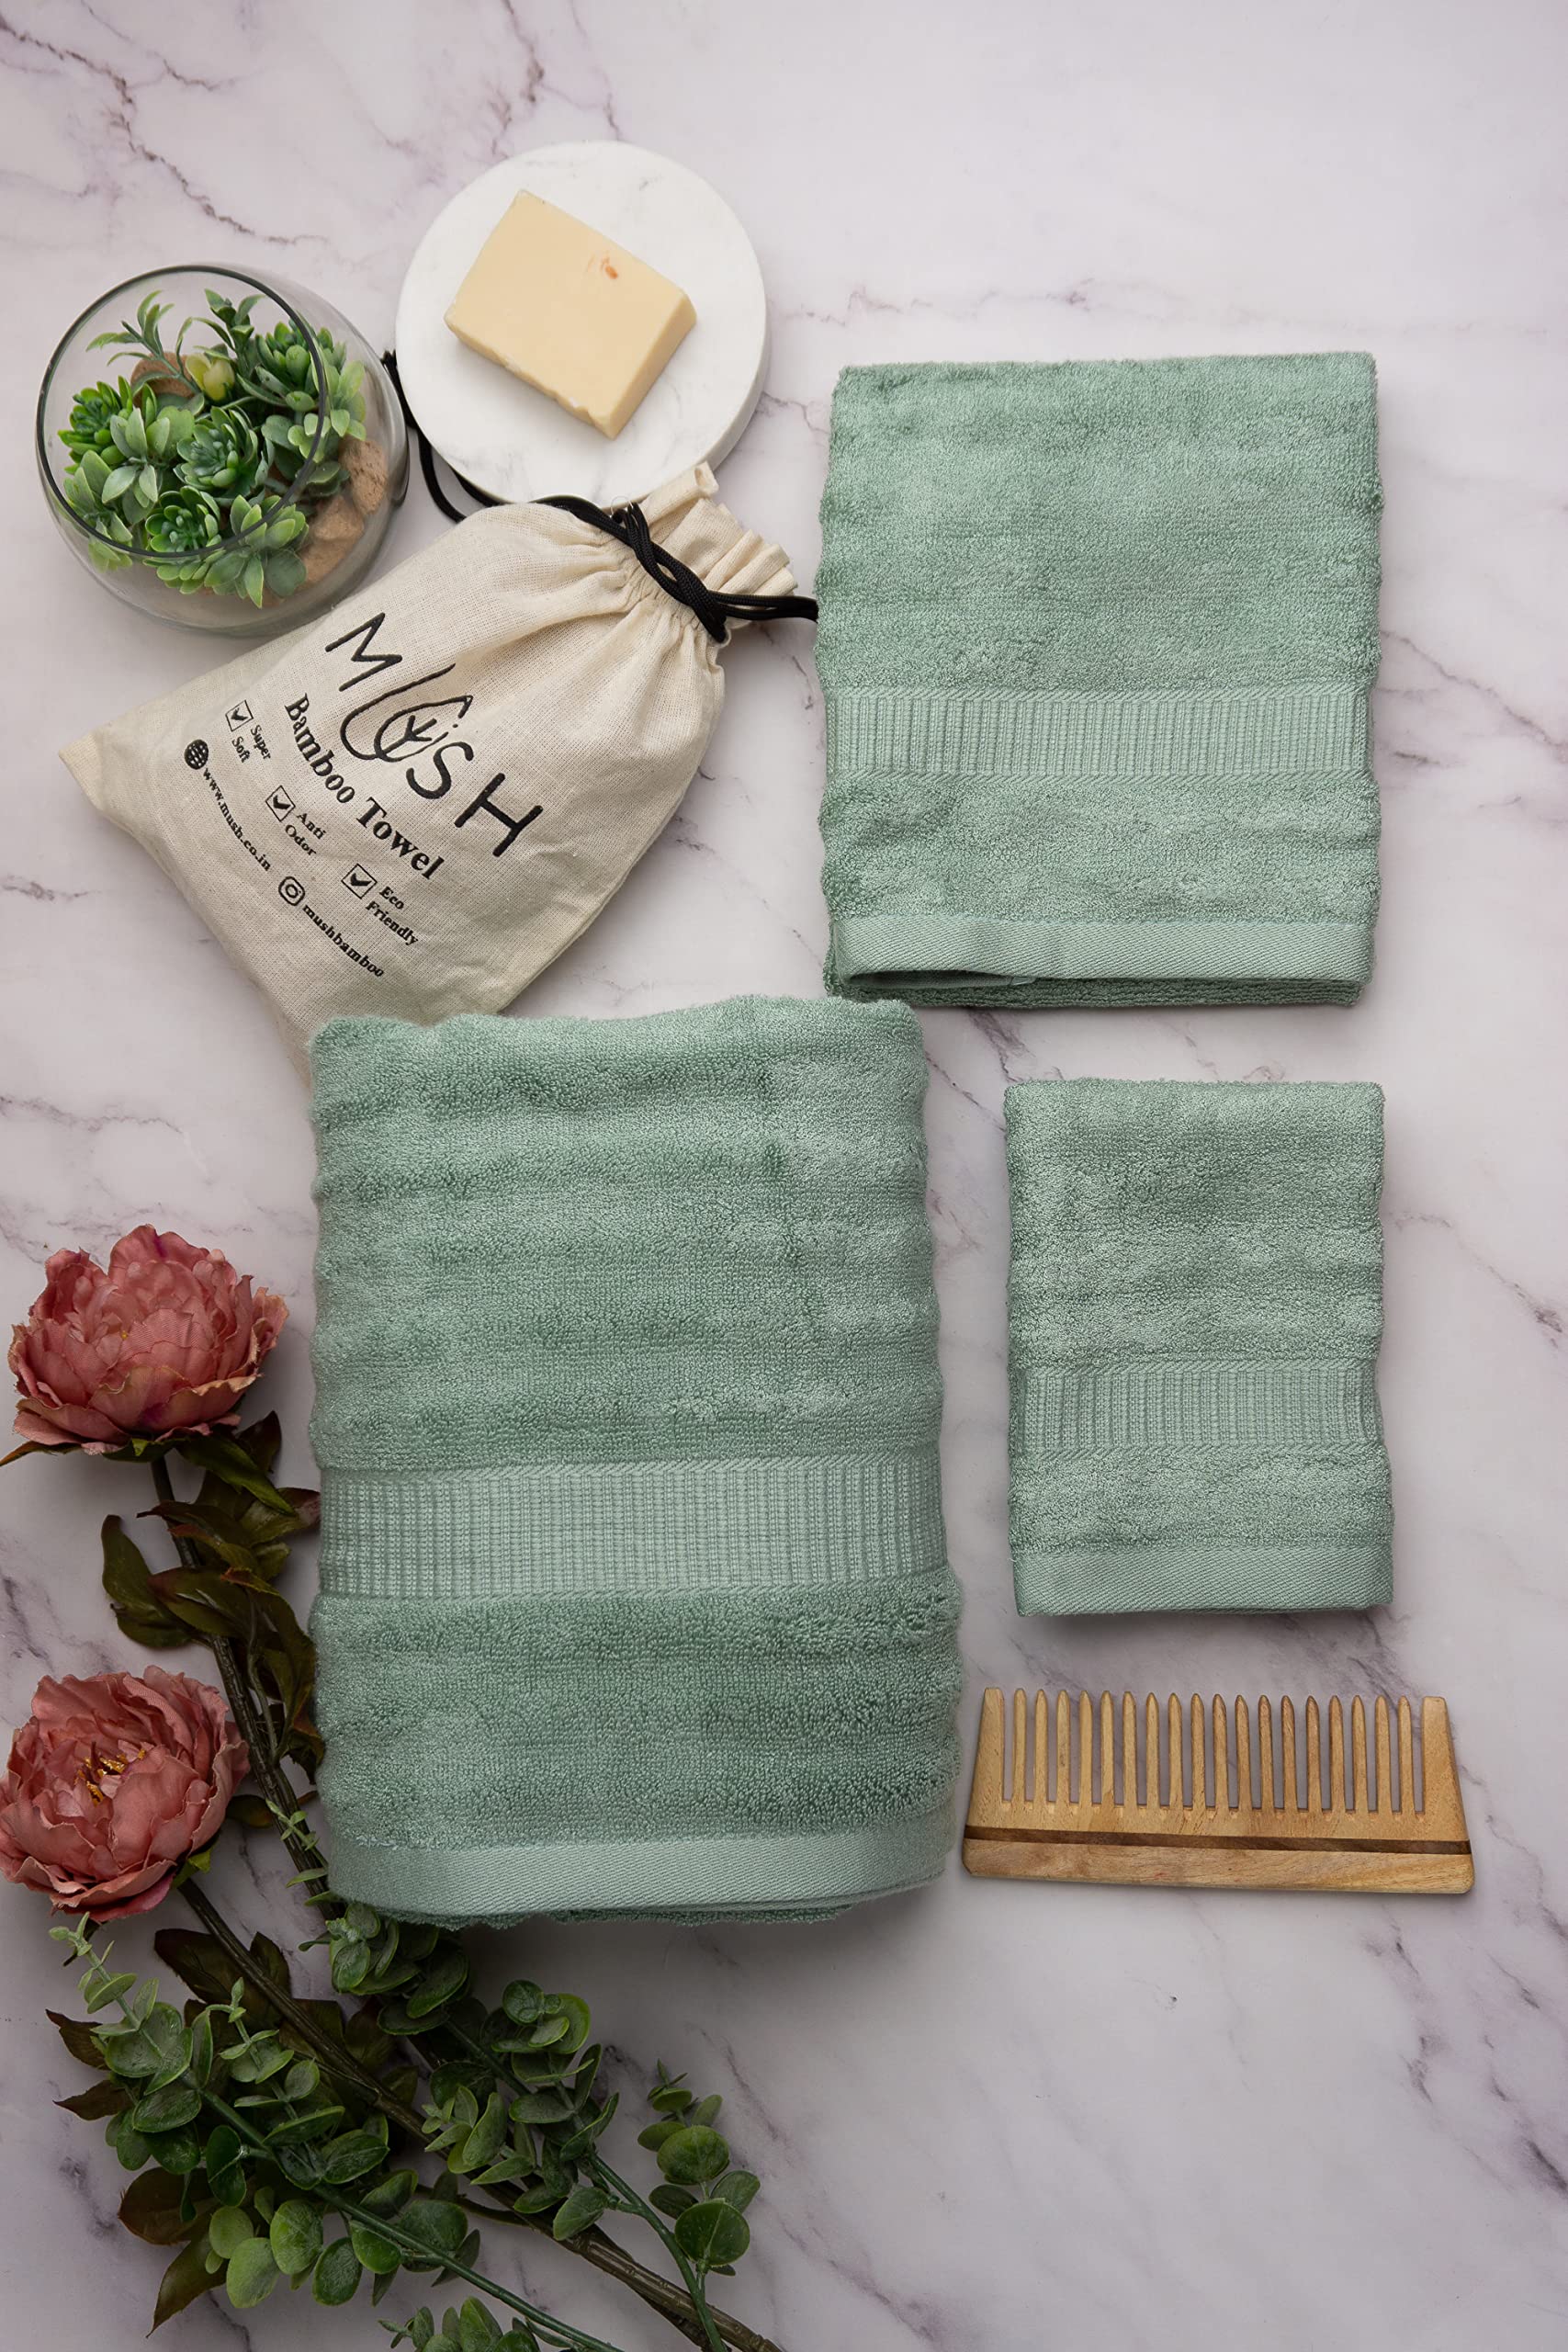 Mush Bamboo Towel: Ultra Soft, Absorbent, Eco 600 GSM 6 Pieces (2 Bath, 2 Hand, 2 Face) Couple Gift Set (Navy & Green)